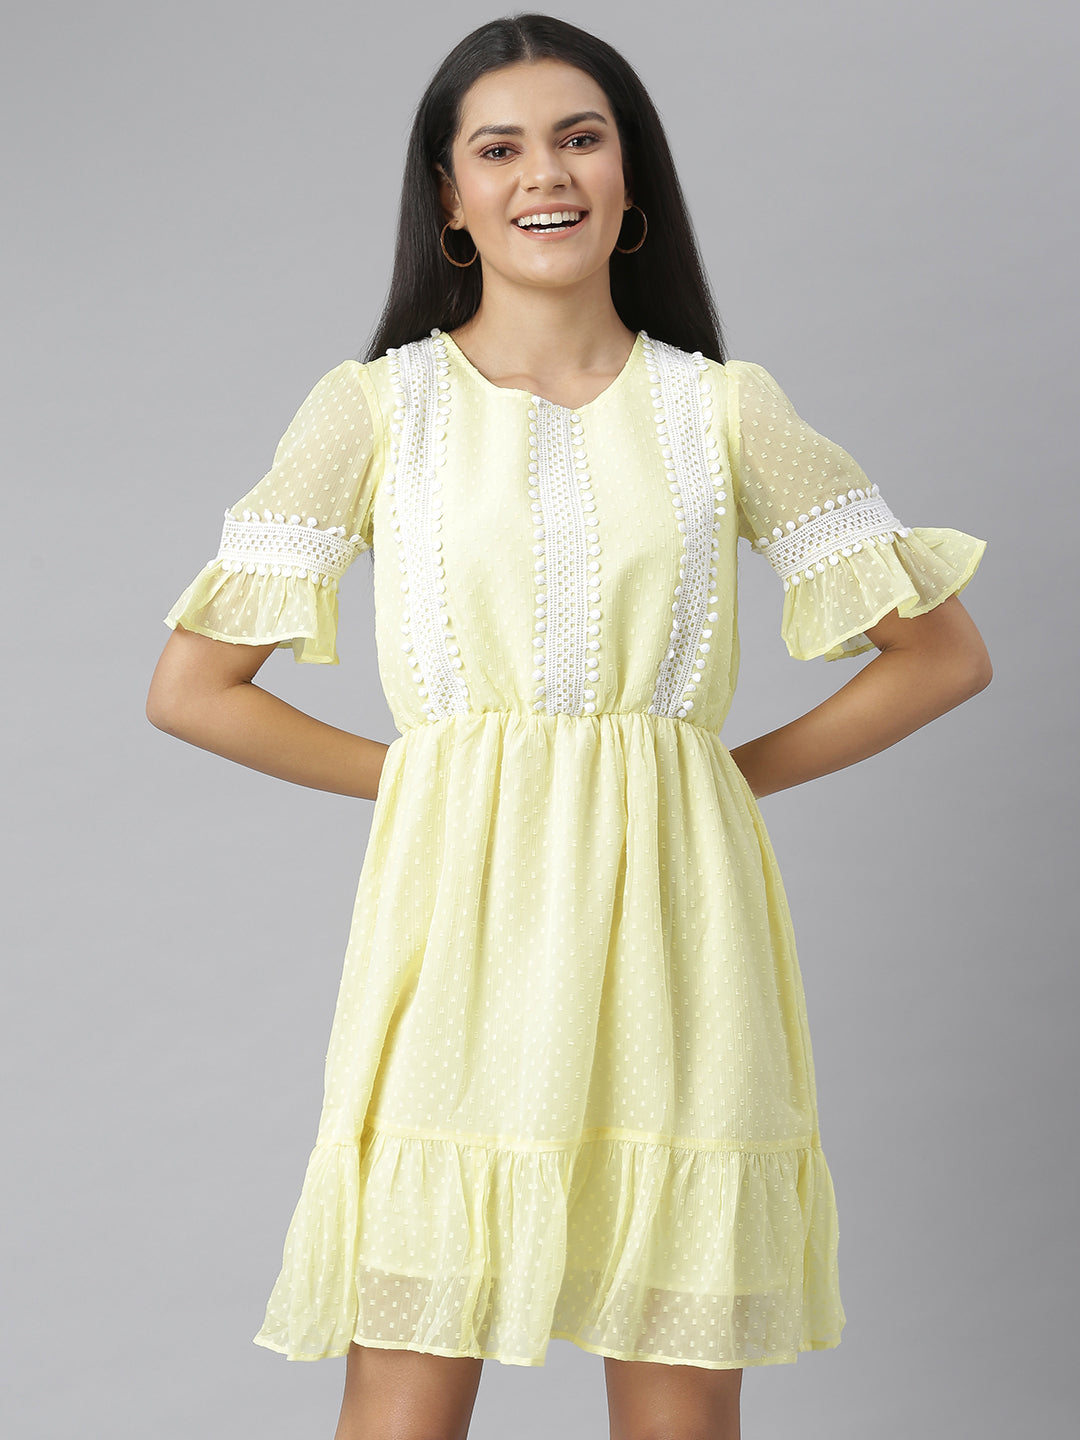 Women's Yellow Self Design Dress with Lace Insets